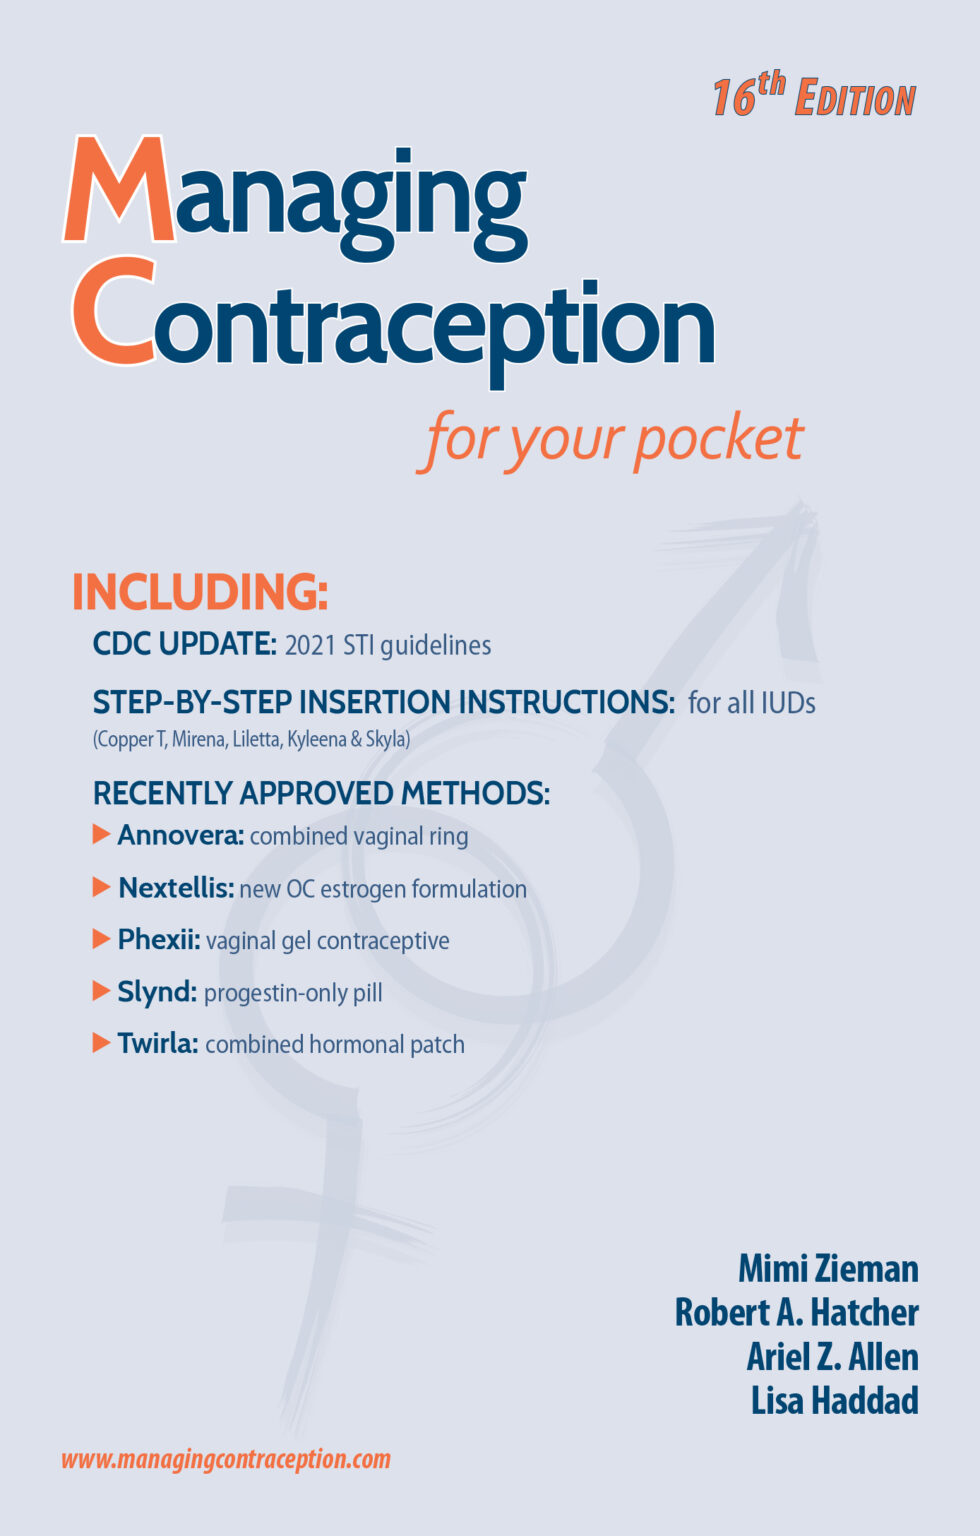 Managing Contraception Everything you wanted to know about